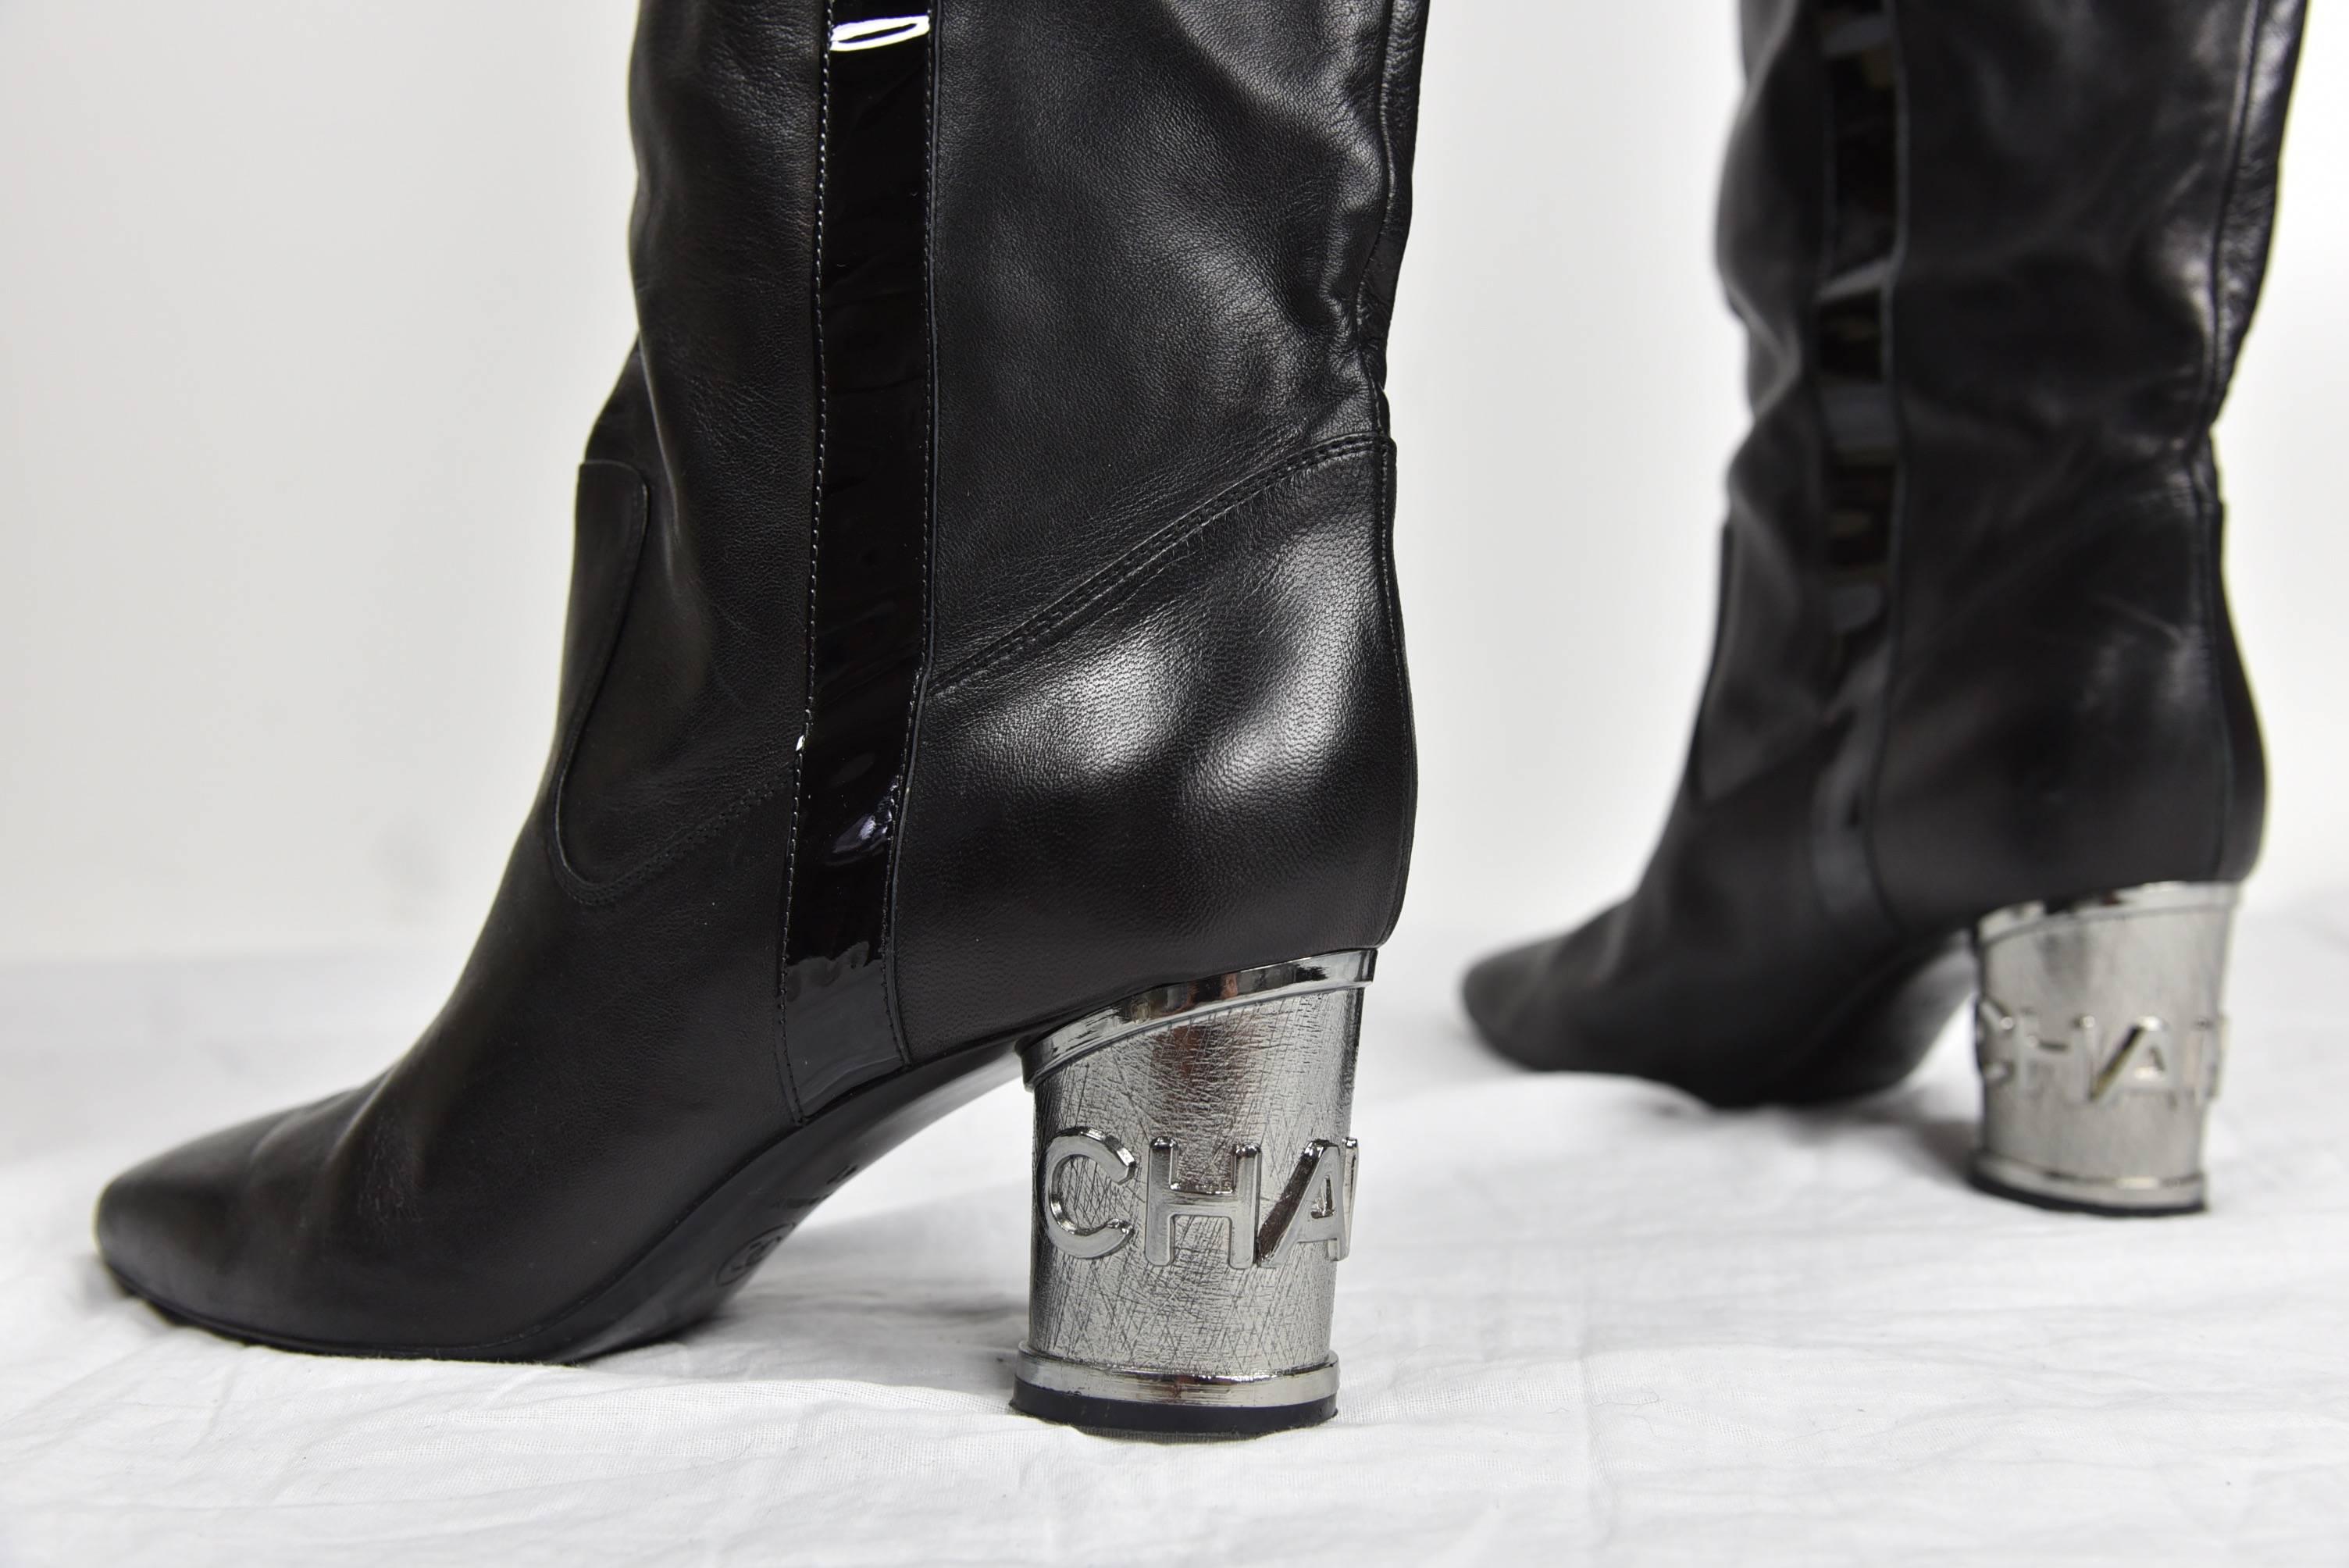 Women's Chanel Circa 2000 Black Over the Knee Height Boots with Silver Chanel Heels FR41 For Sale